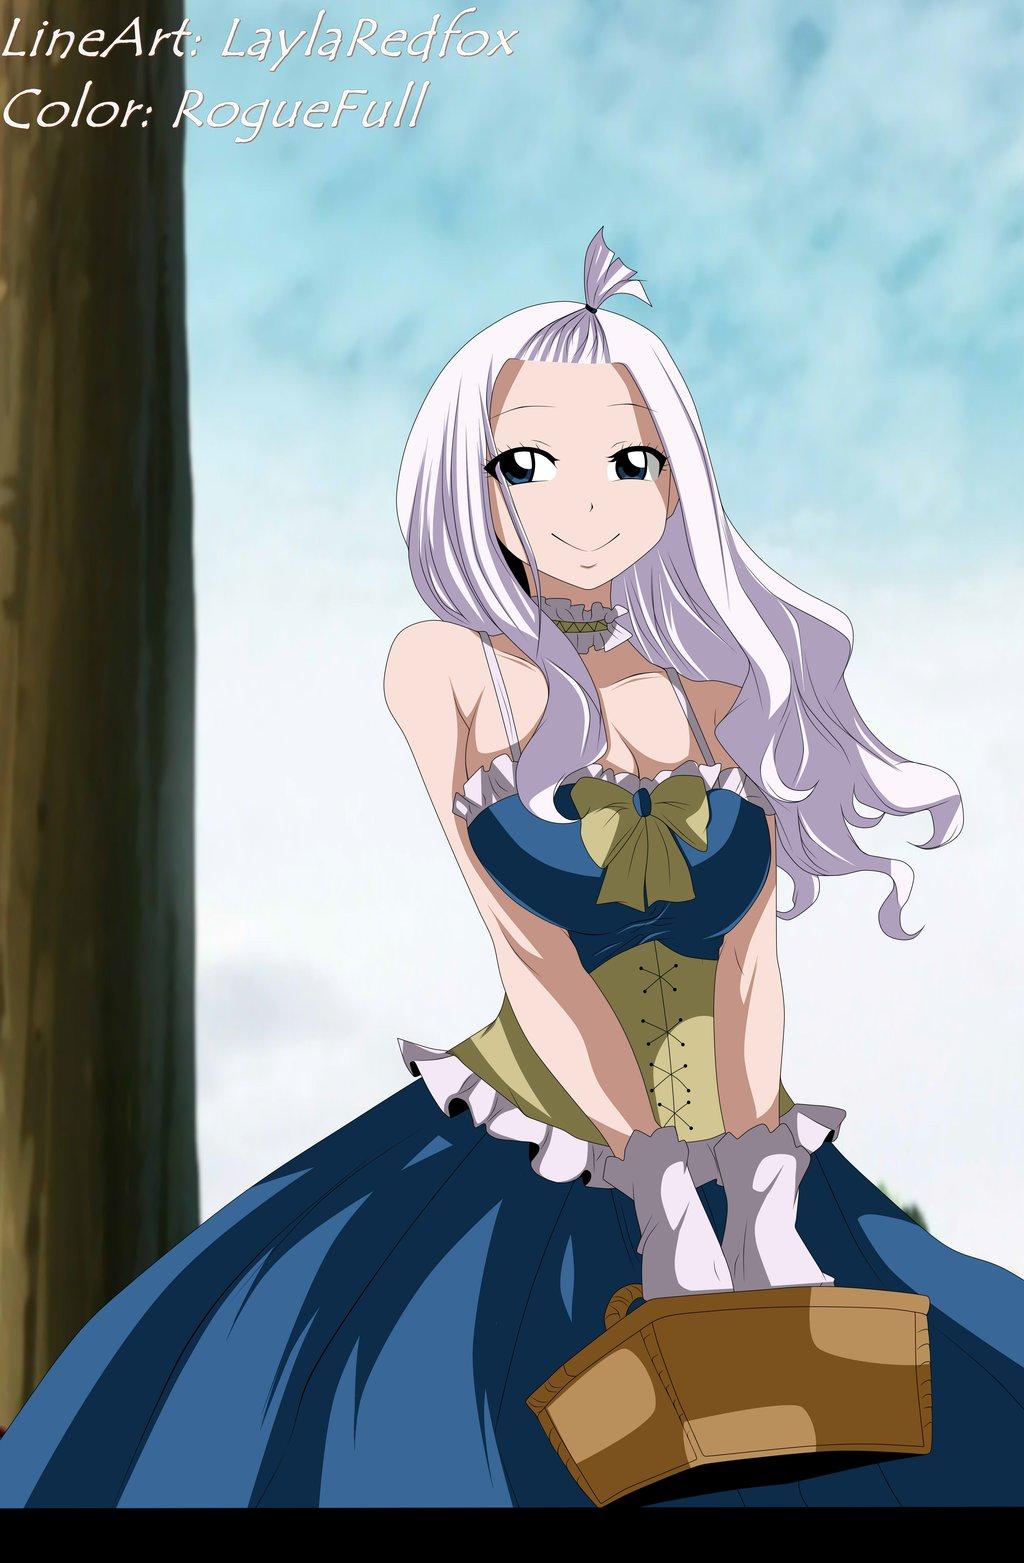 60+ Hot Pictures Of Mirajane Strauss from Fairy Tail Which Are Sure to Catch Your Attention | Best Of Comic Books